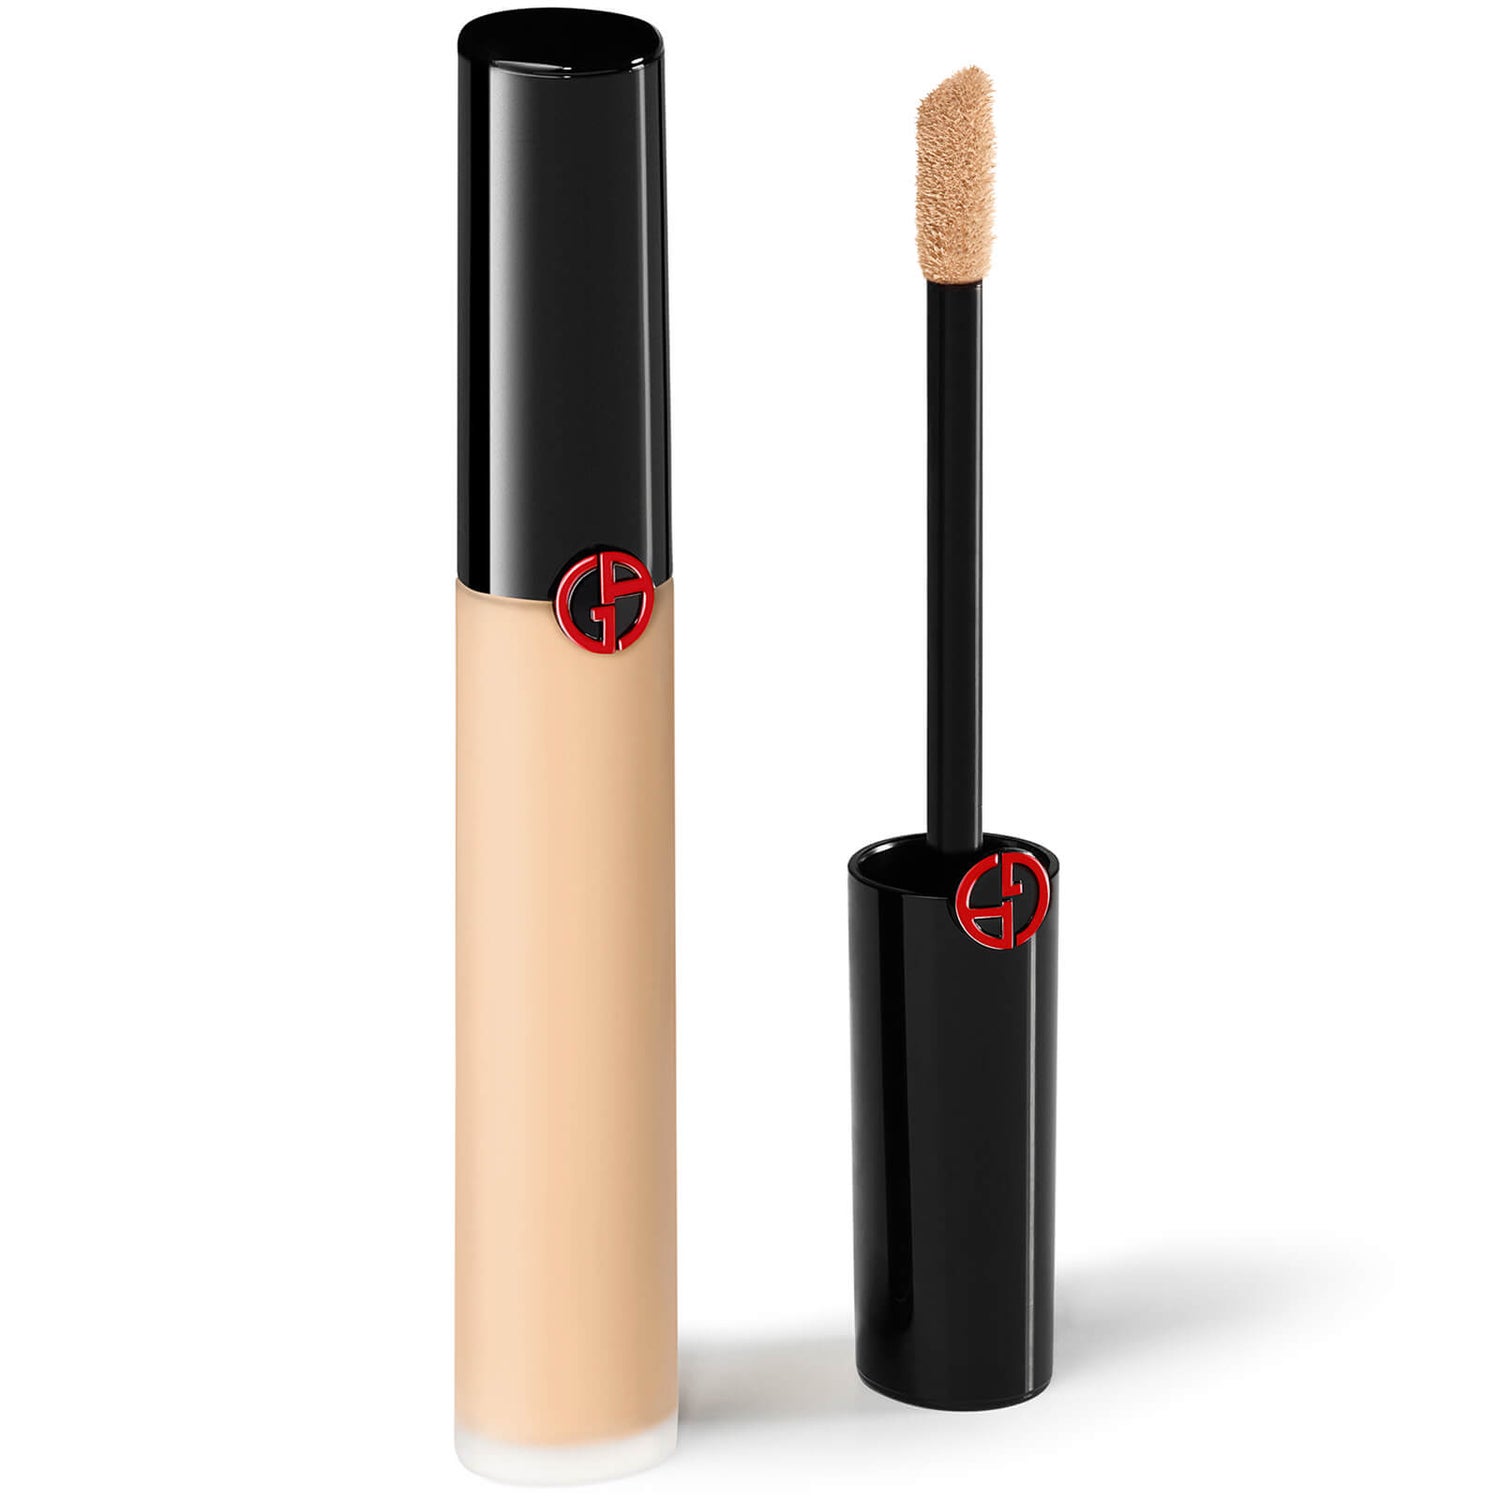 Armani Power Fabric Concealer 30g (Various Shades)